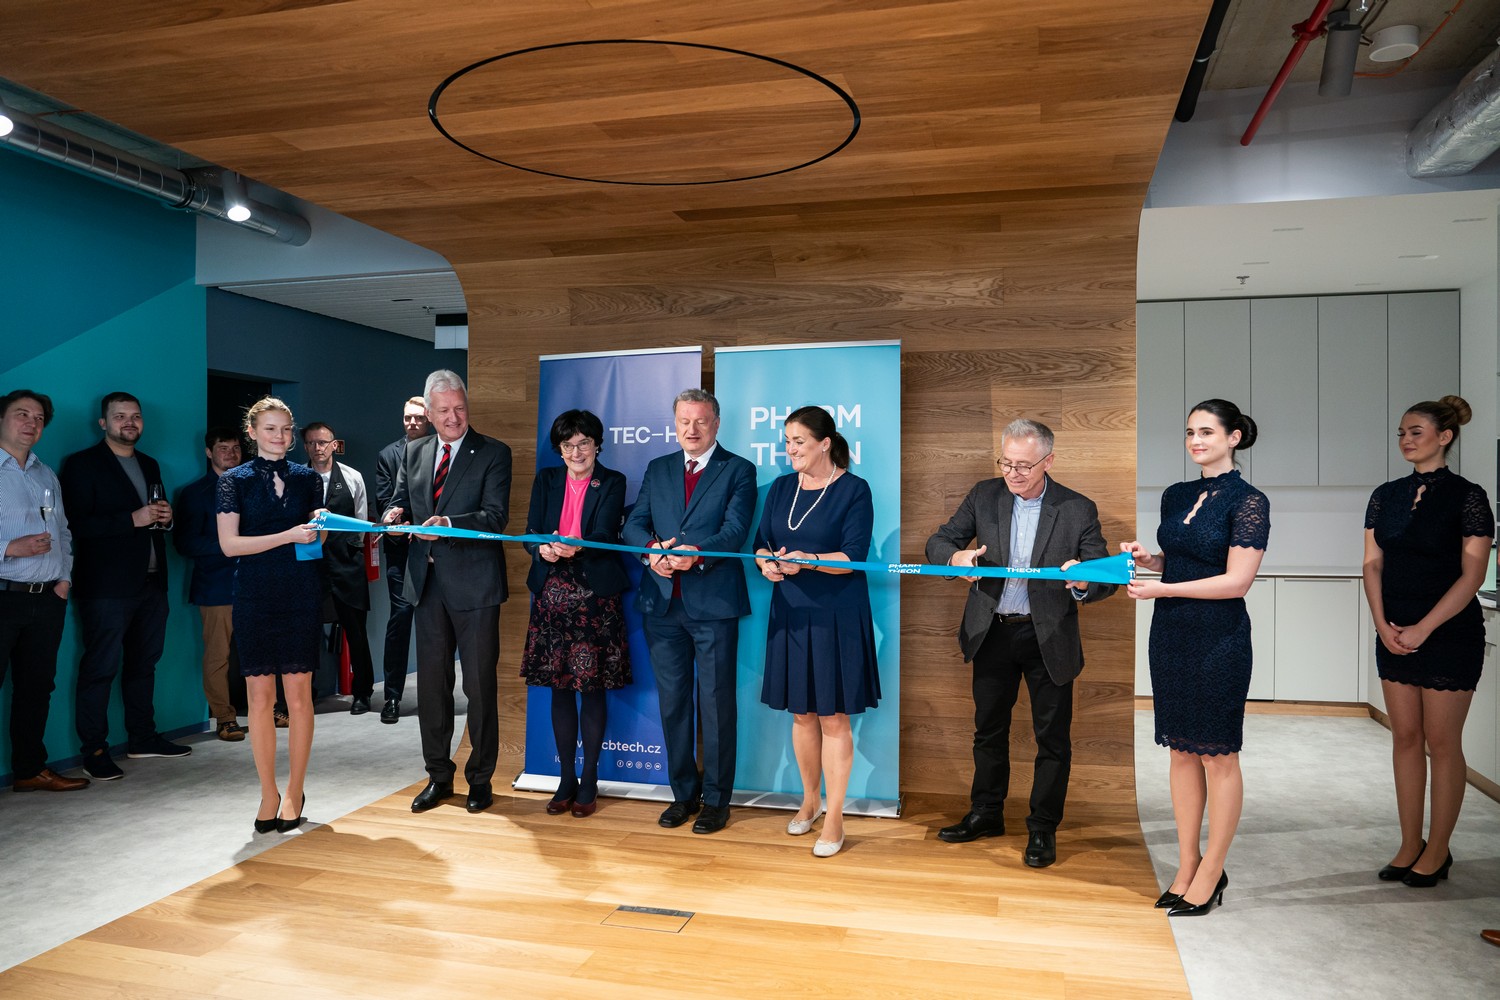 IOCB Tech has opened Pharmtheon, a high-tech center for new medicines in Prague